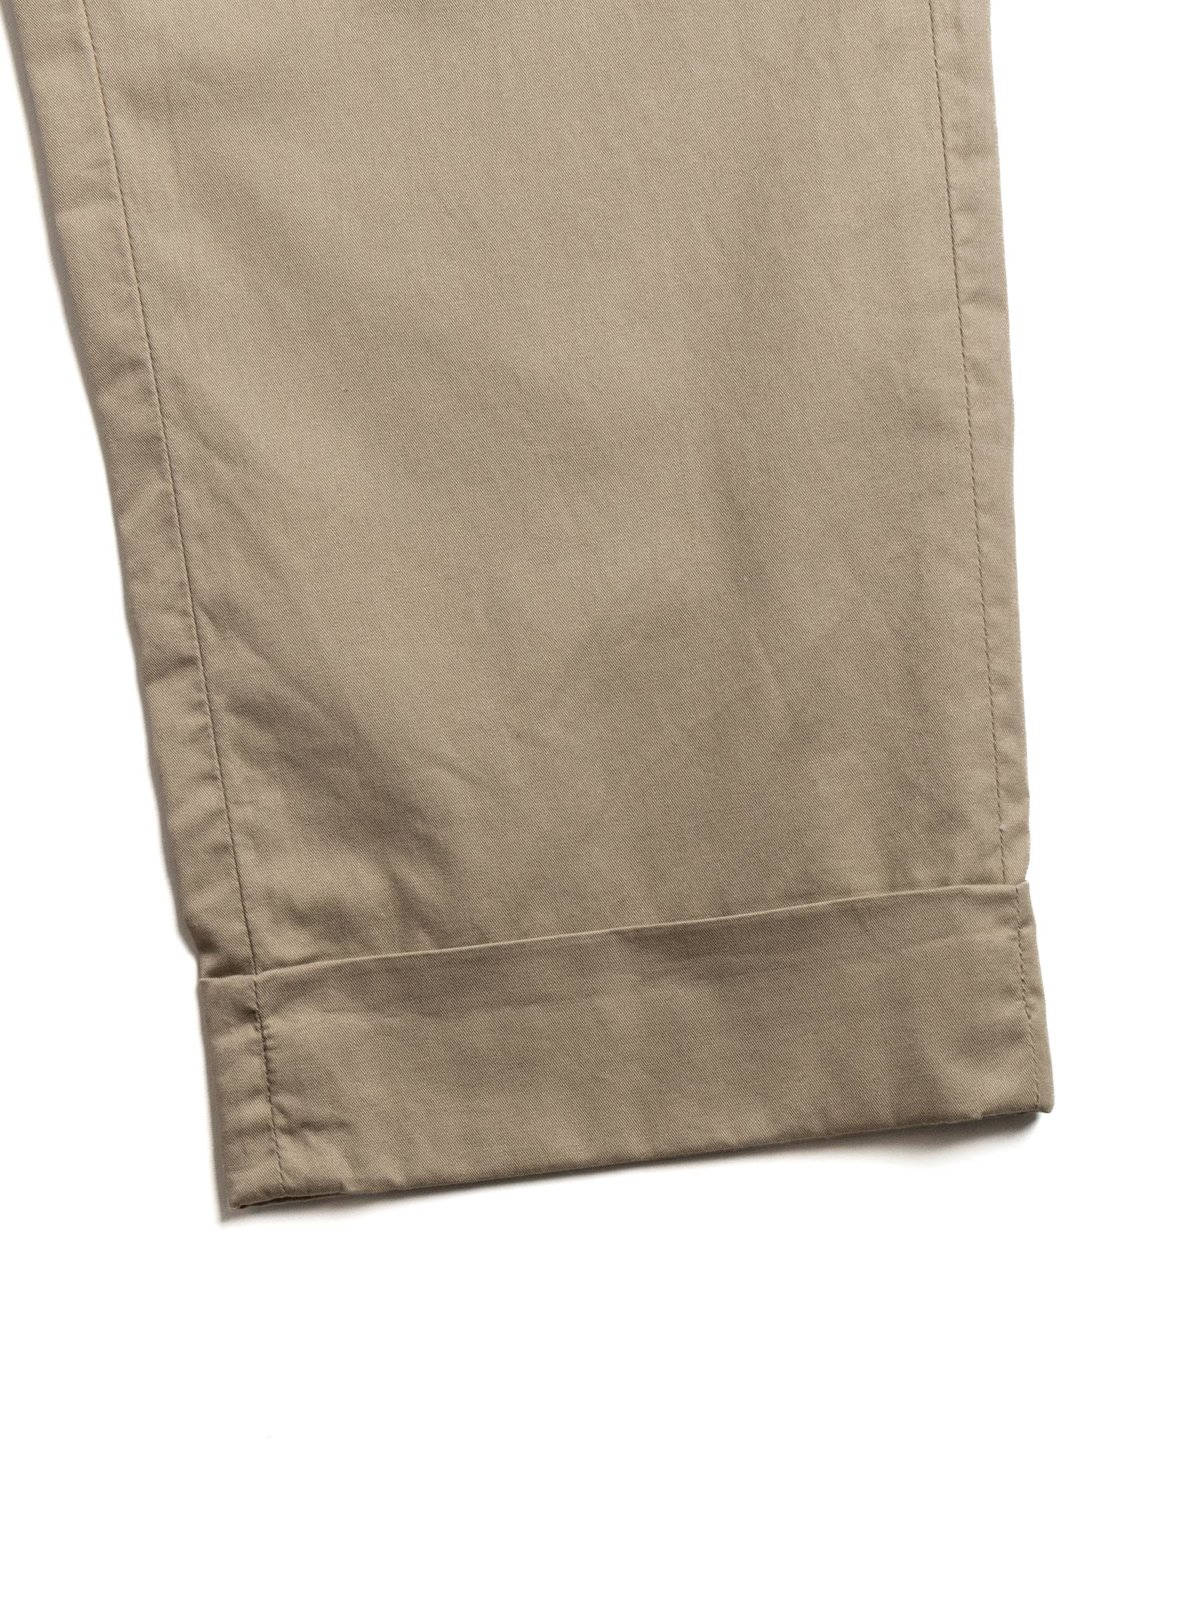 ANDOVER PANT KHAKI HIGH COUNT TWILL - Image 4